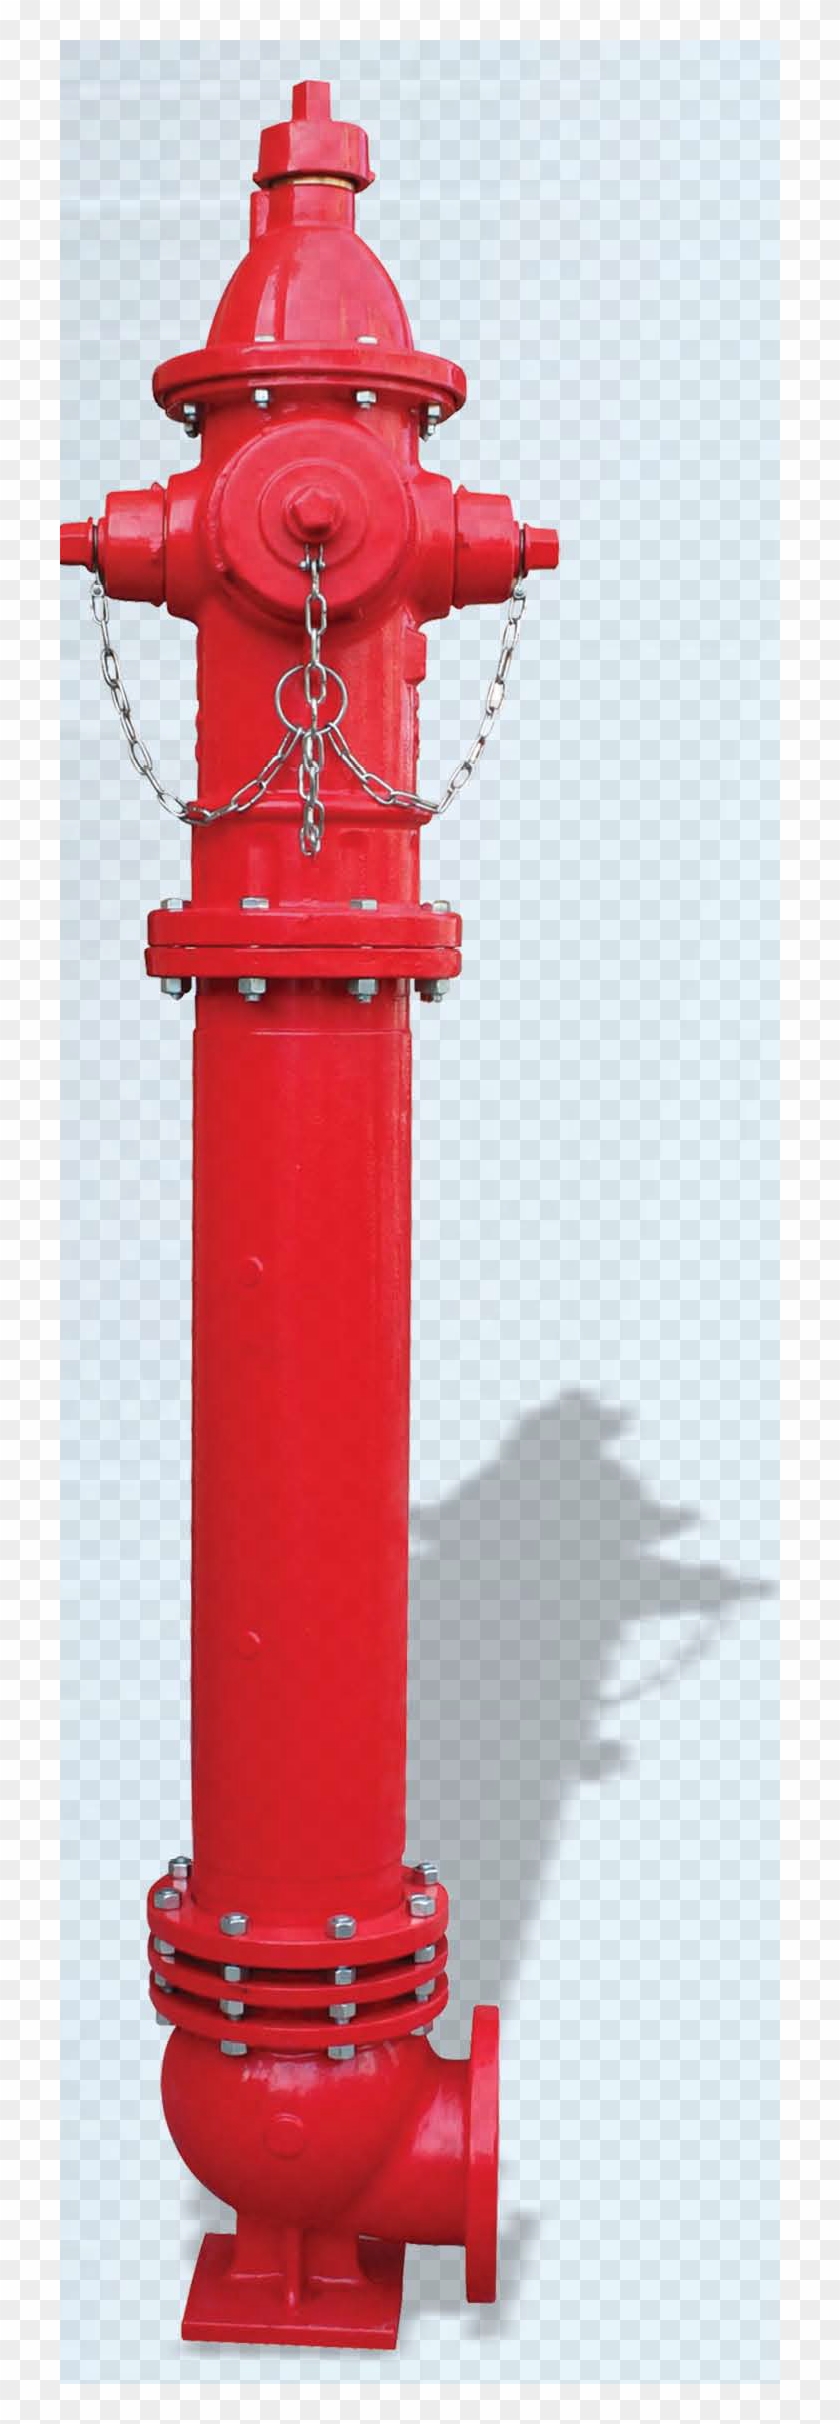 Fire Hydrant Conflagration Fire Protection Valve - Fire Hydrant Conflagration Fire Protection Valve #385891